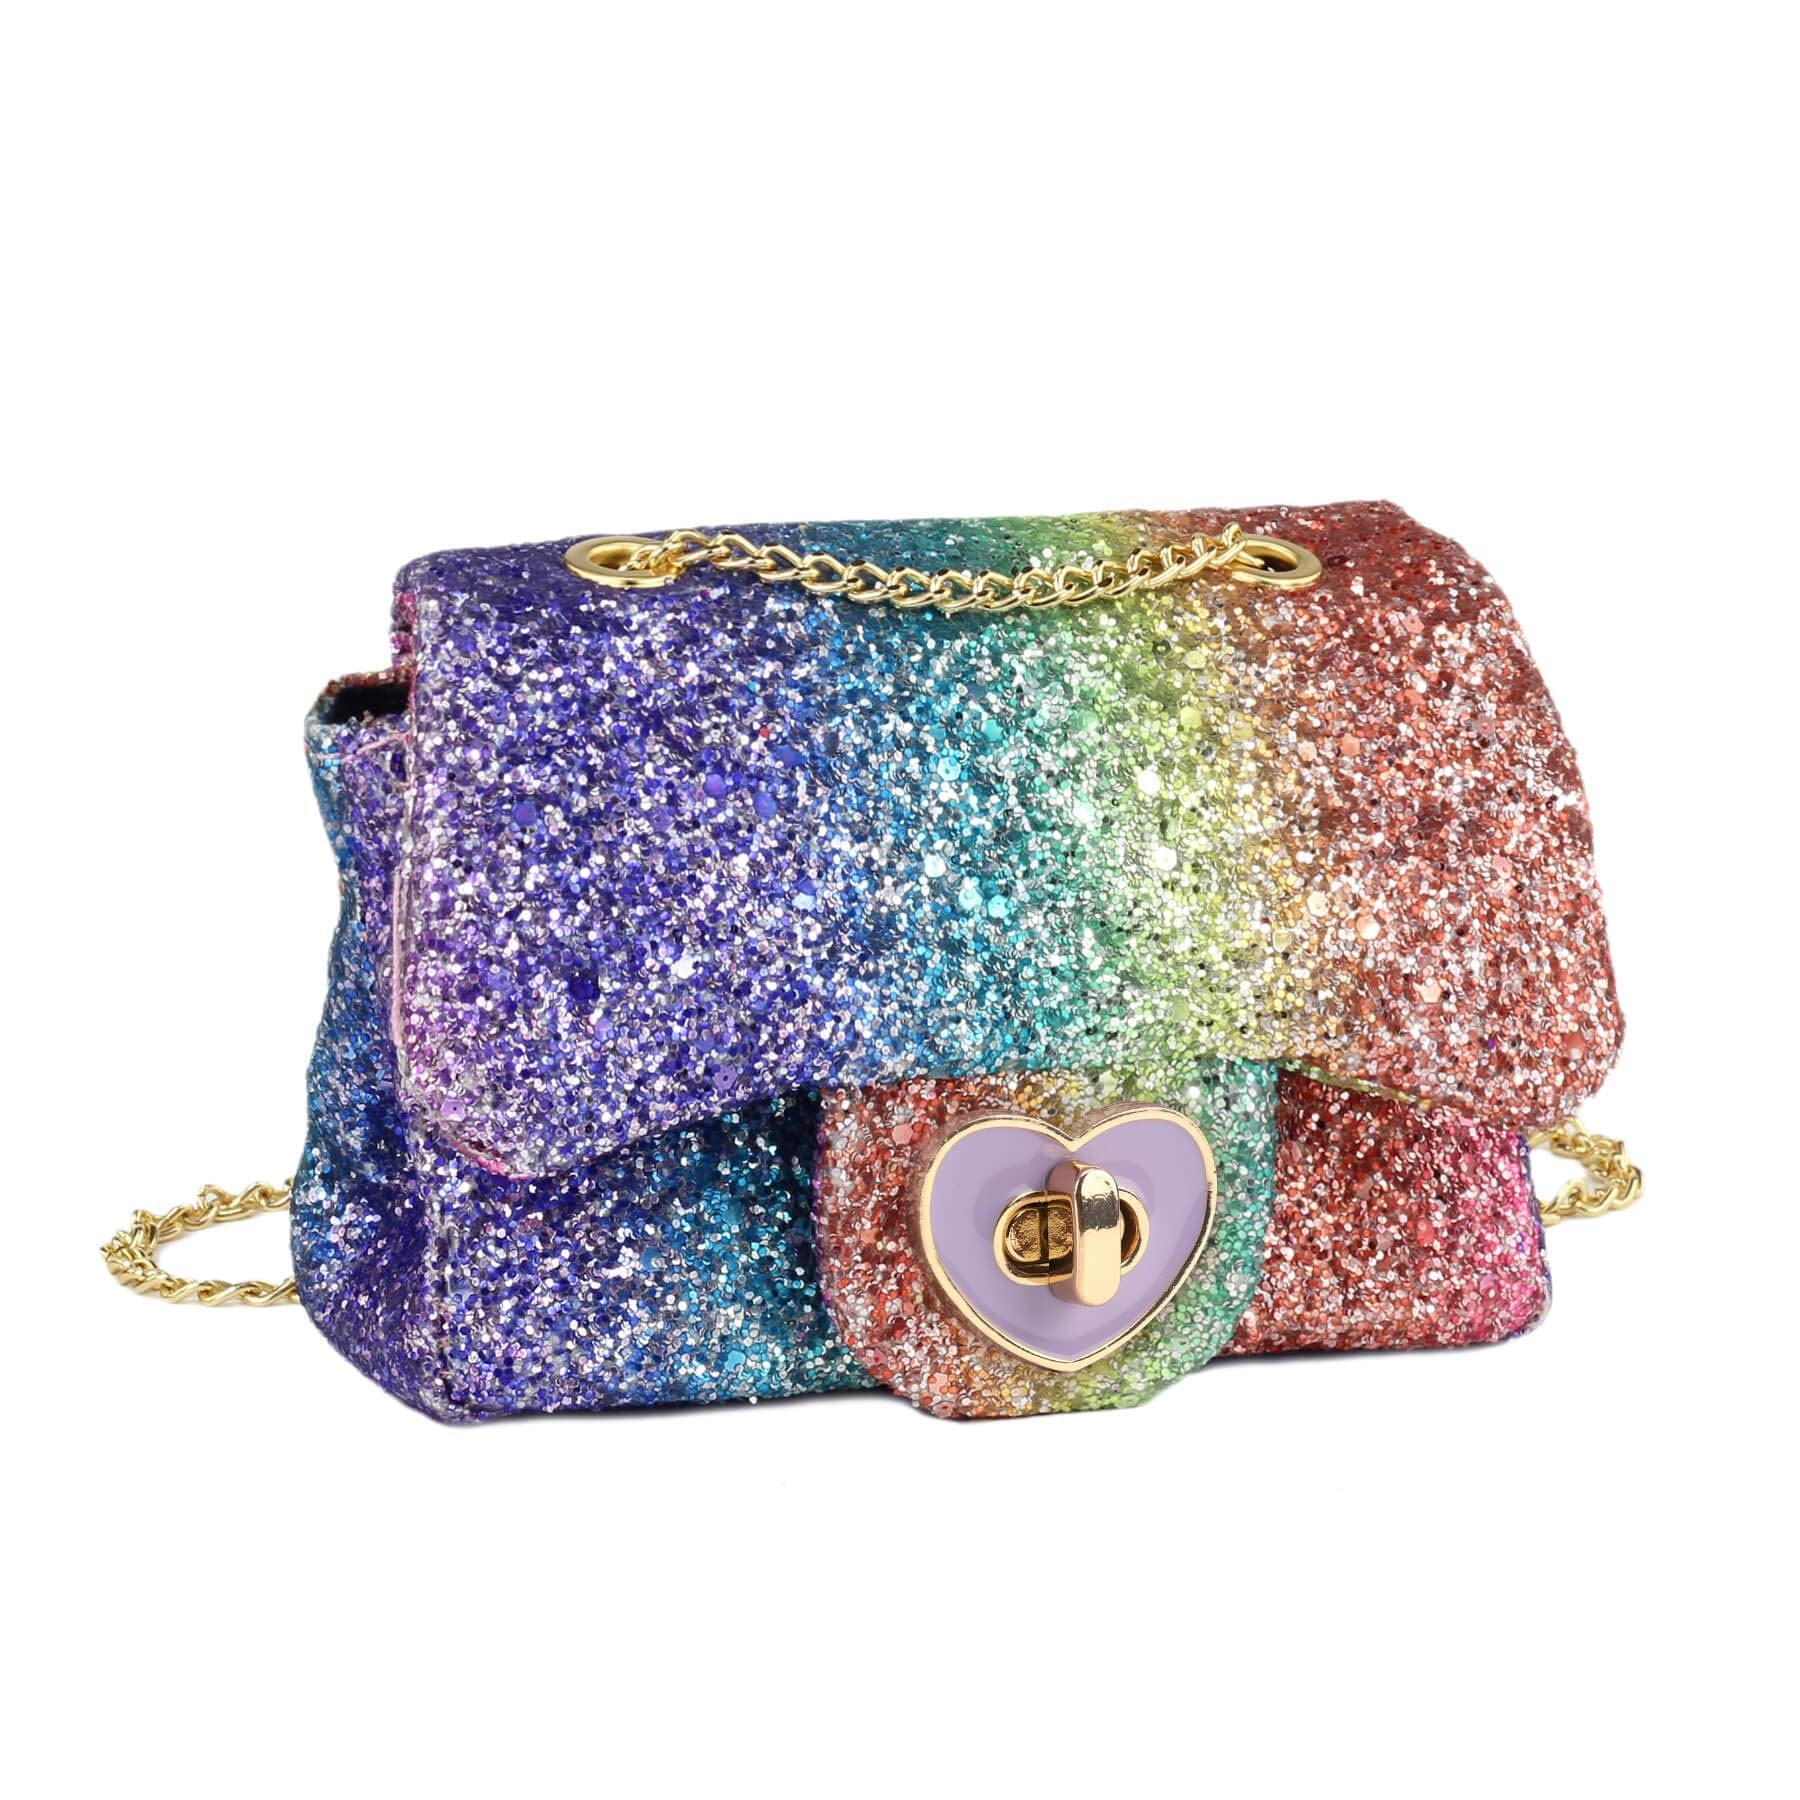 Glittery Bags Stock Photos and Pictures - 292 Images | Shutterstock